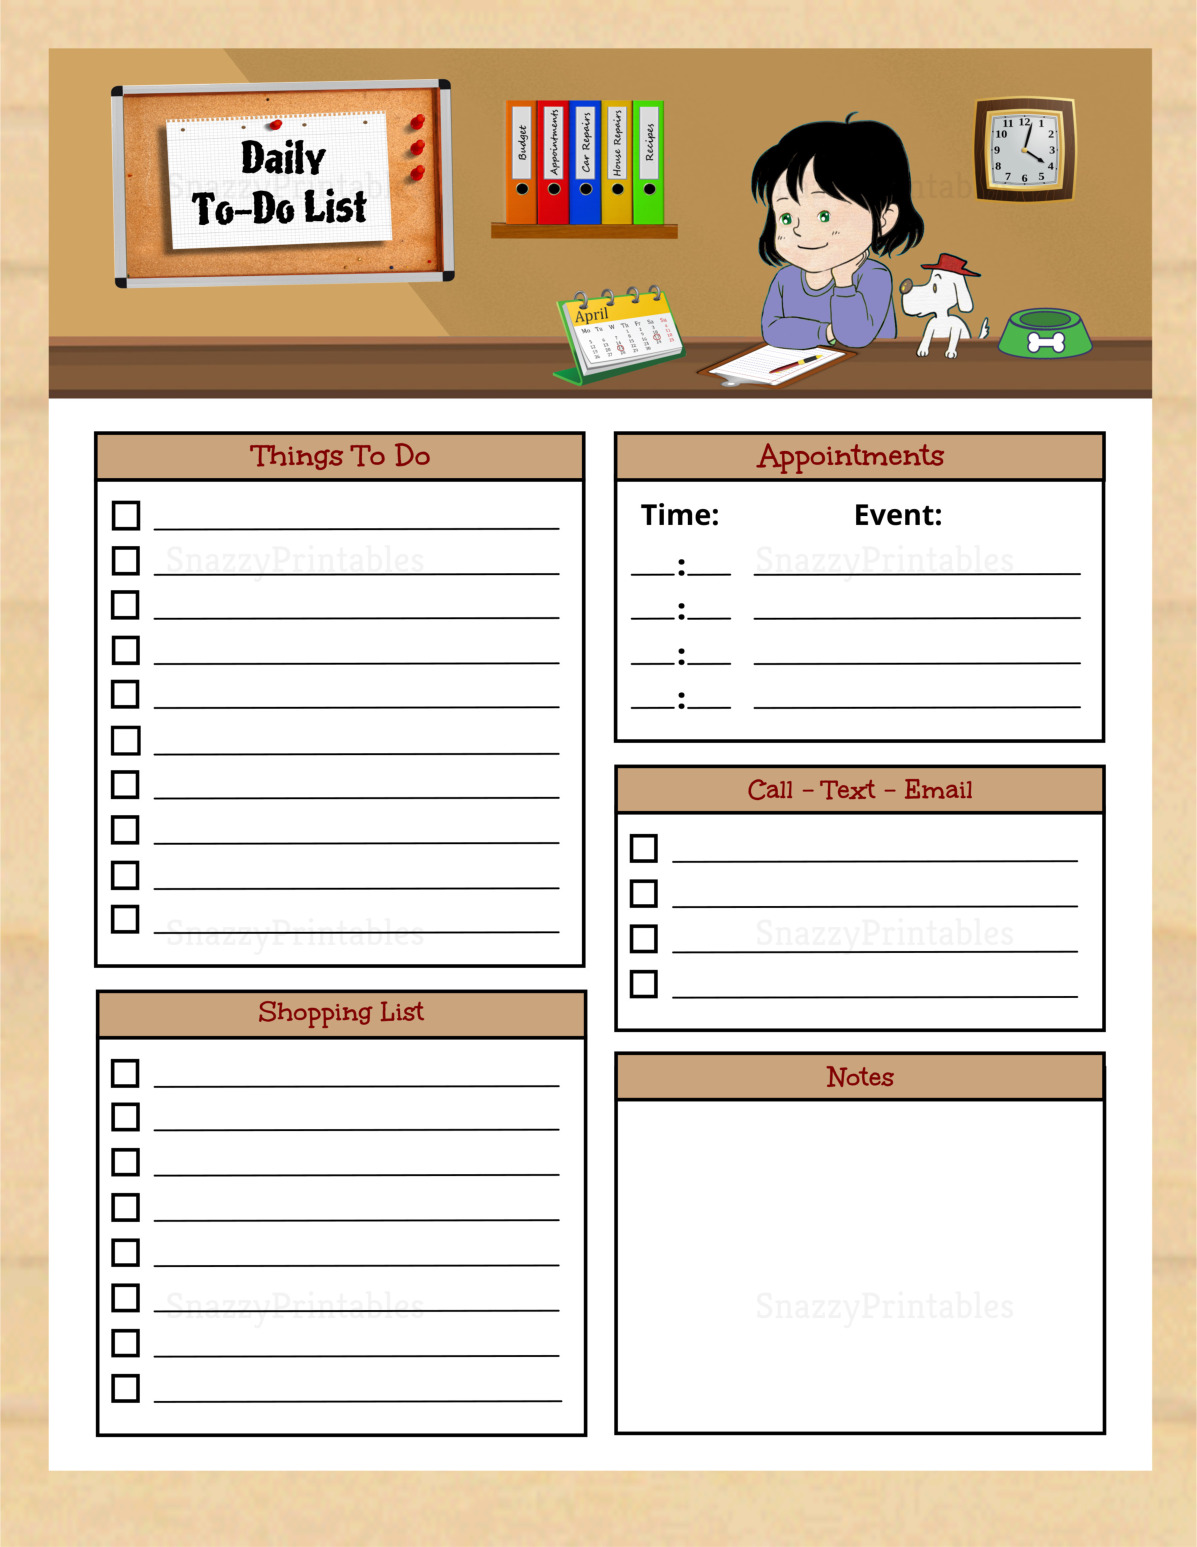 Daily To-Do List Printable - Instant Download PDF